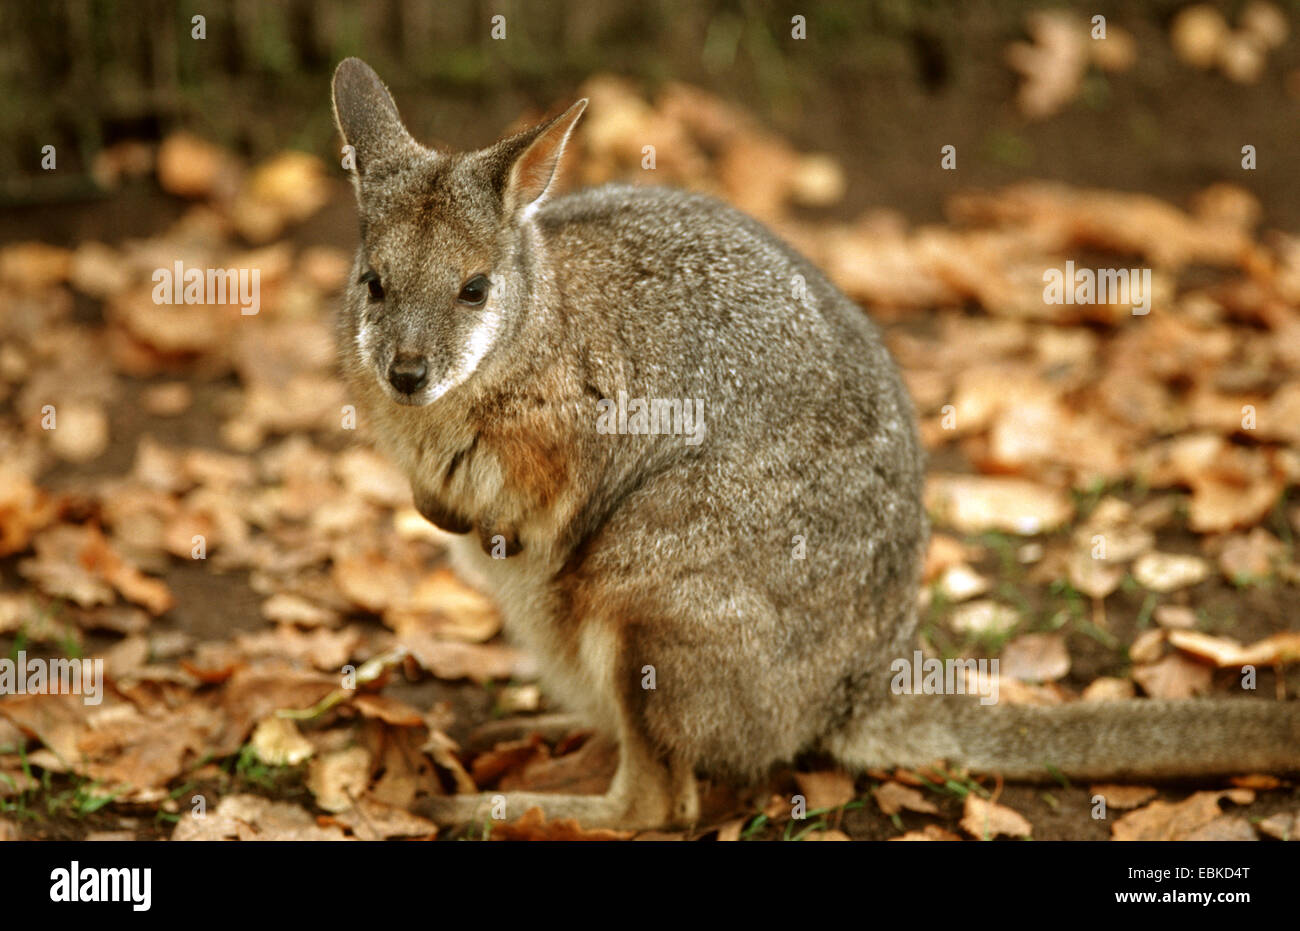 Wallaby tammar, dama wallaby (Macropus eugenii), close-up view Banque D'Images